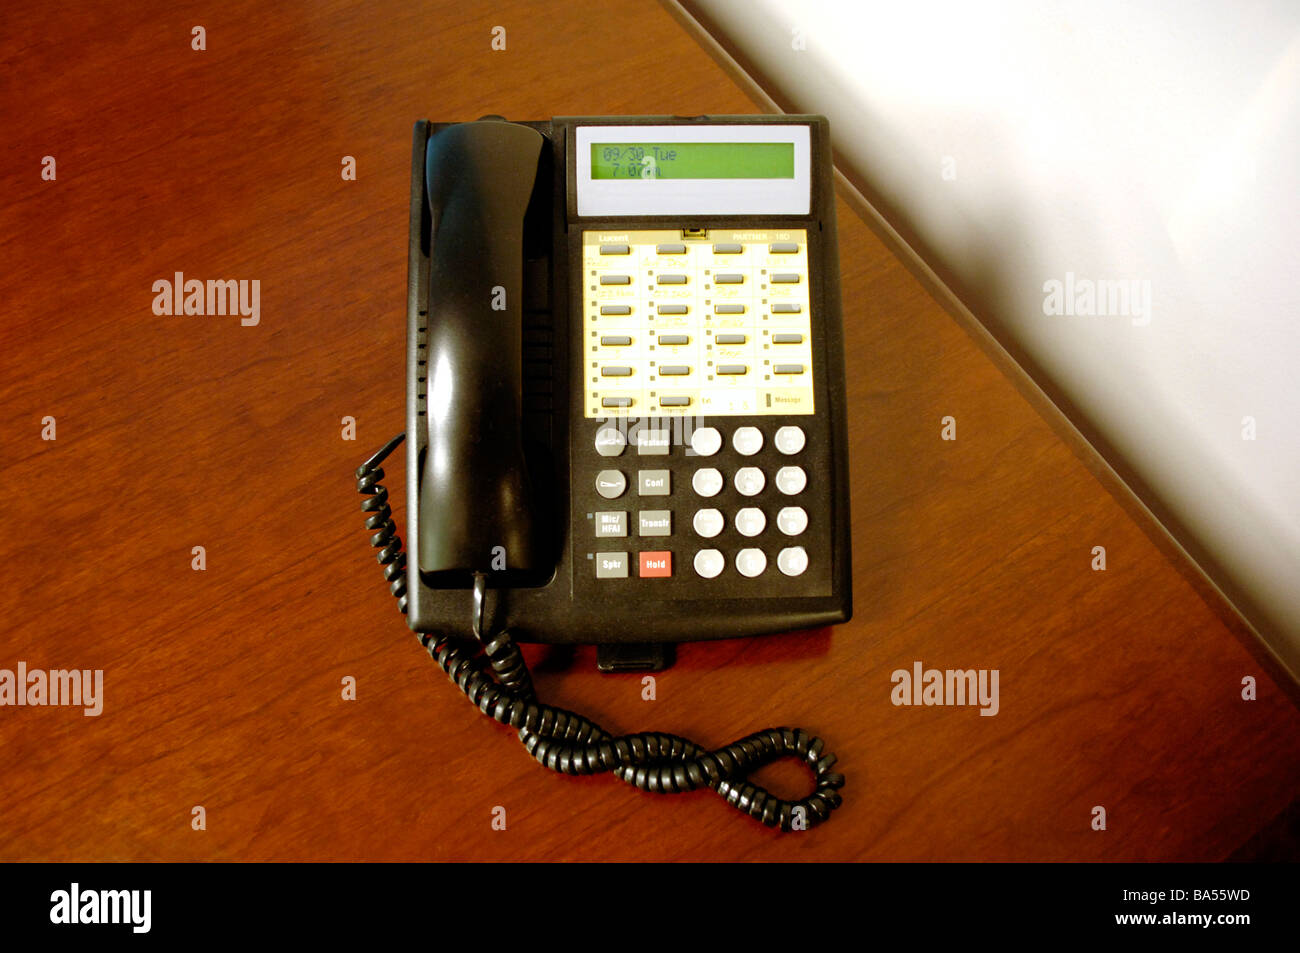 Secretary's office phone with multiple lines, placed on wood grain desk Stock Photo